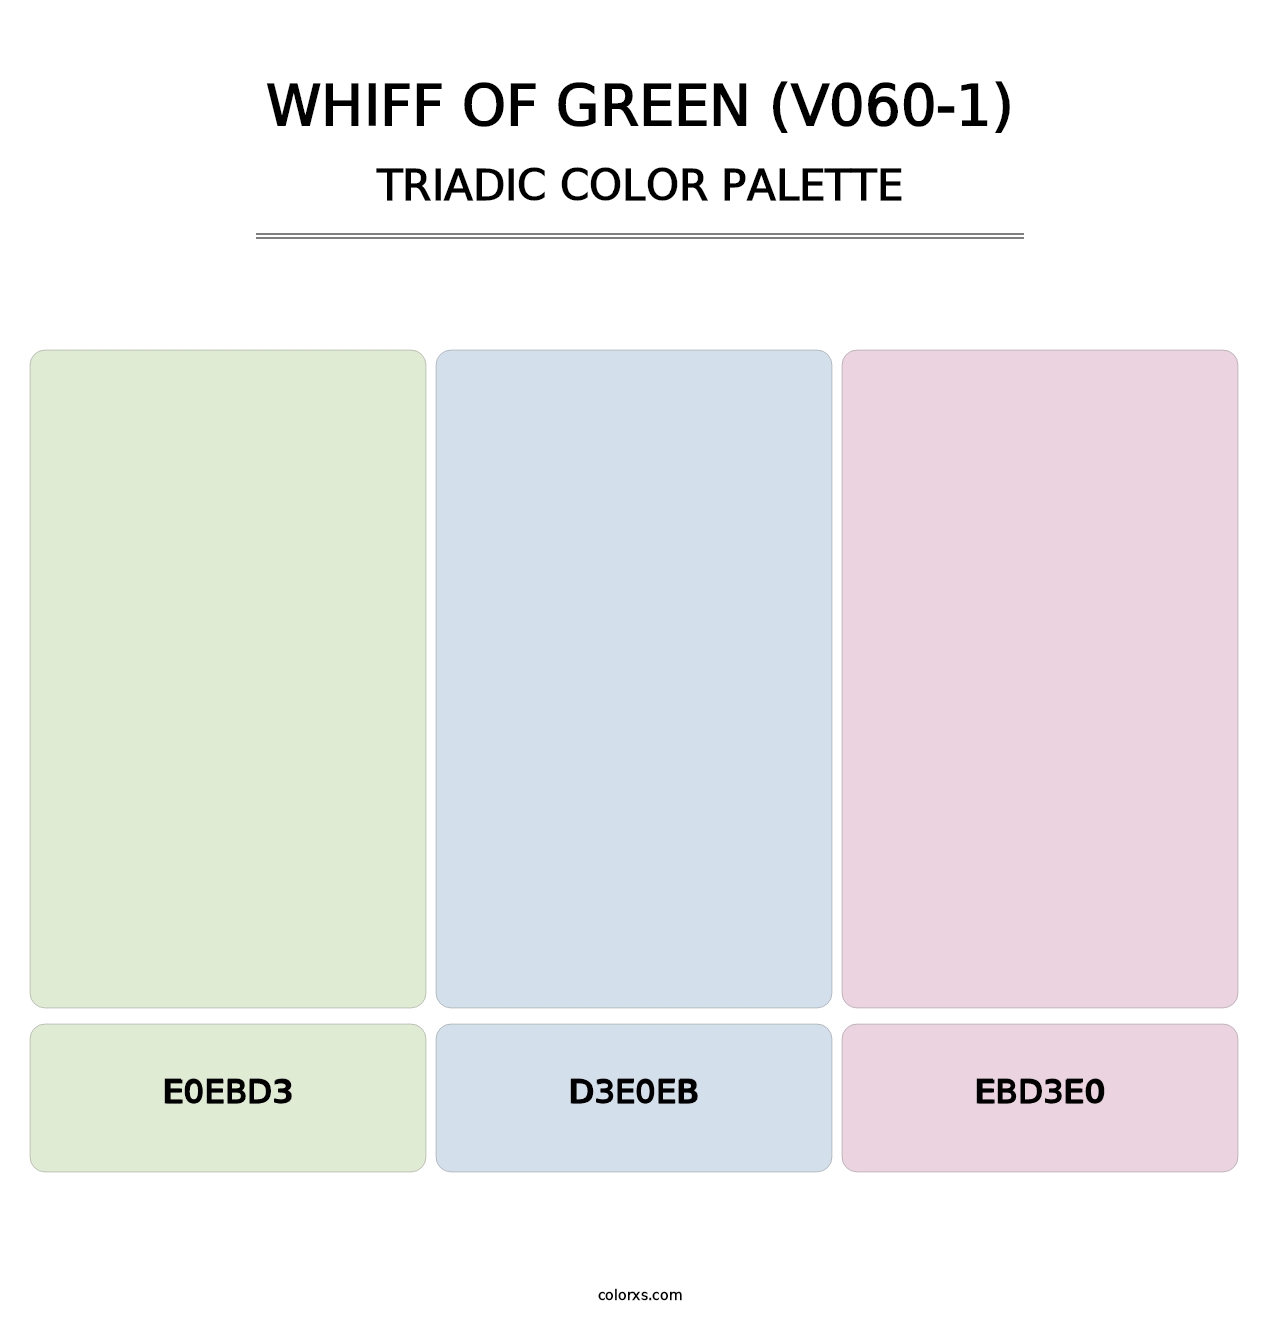 Whiff of Green (V060-1) - Triadic Color Palette